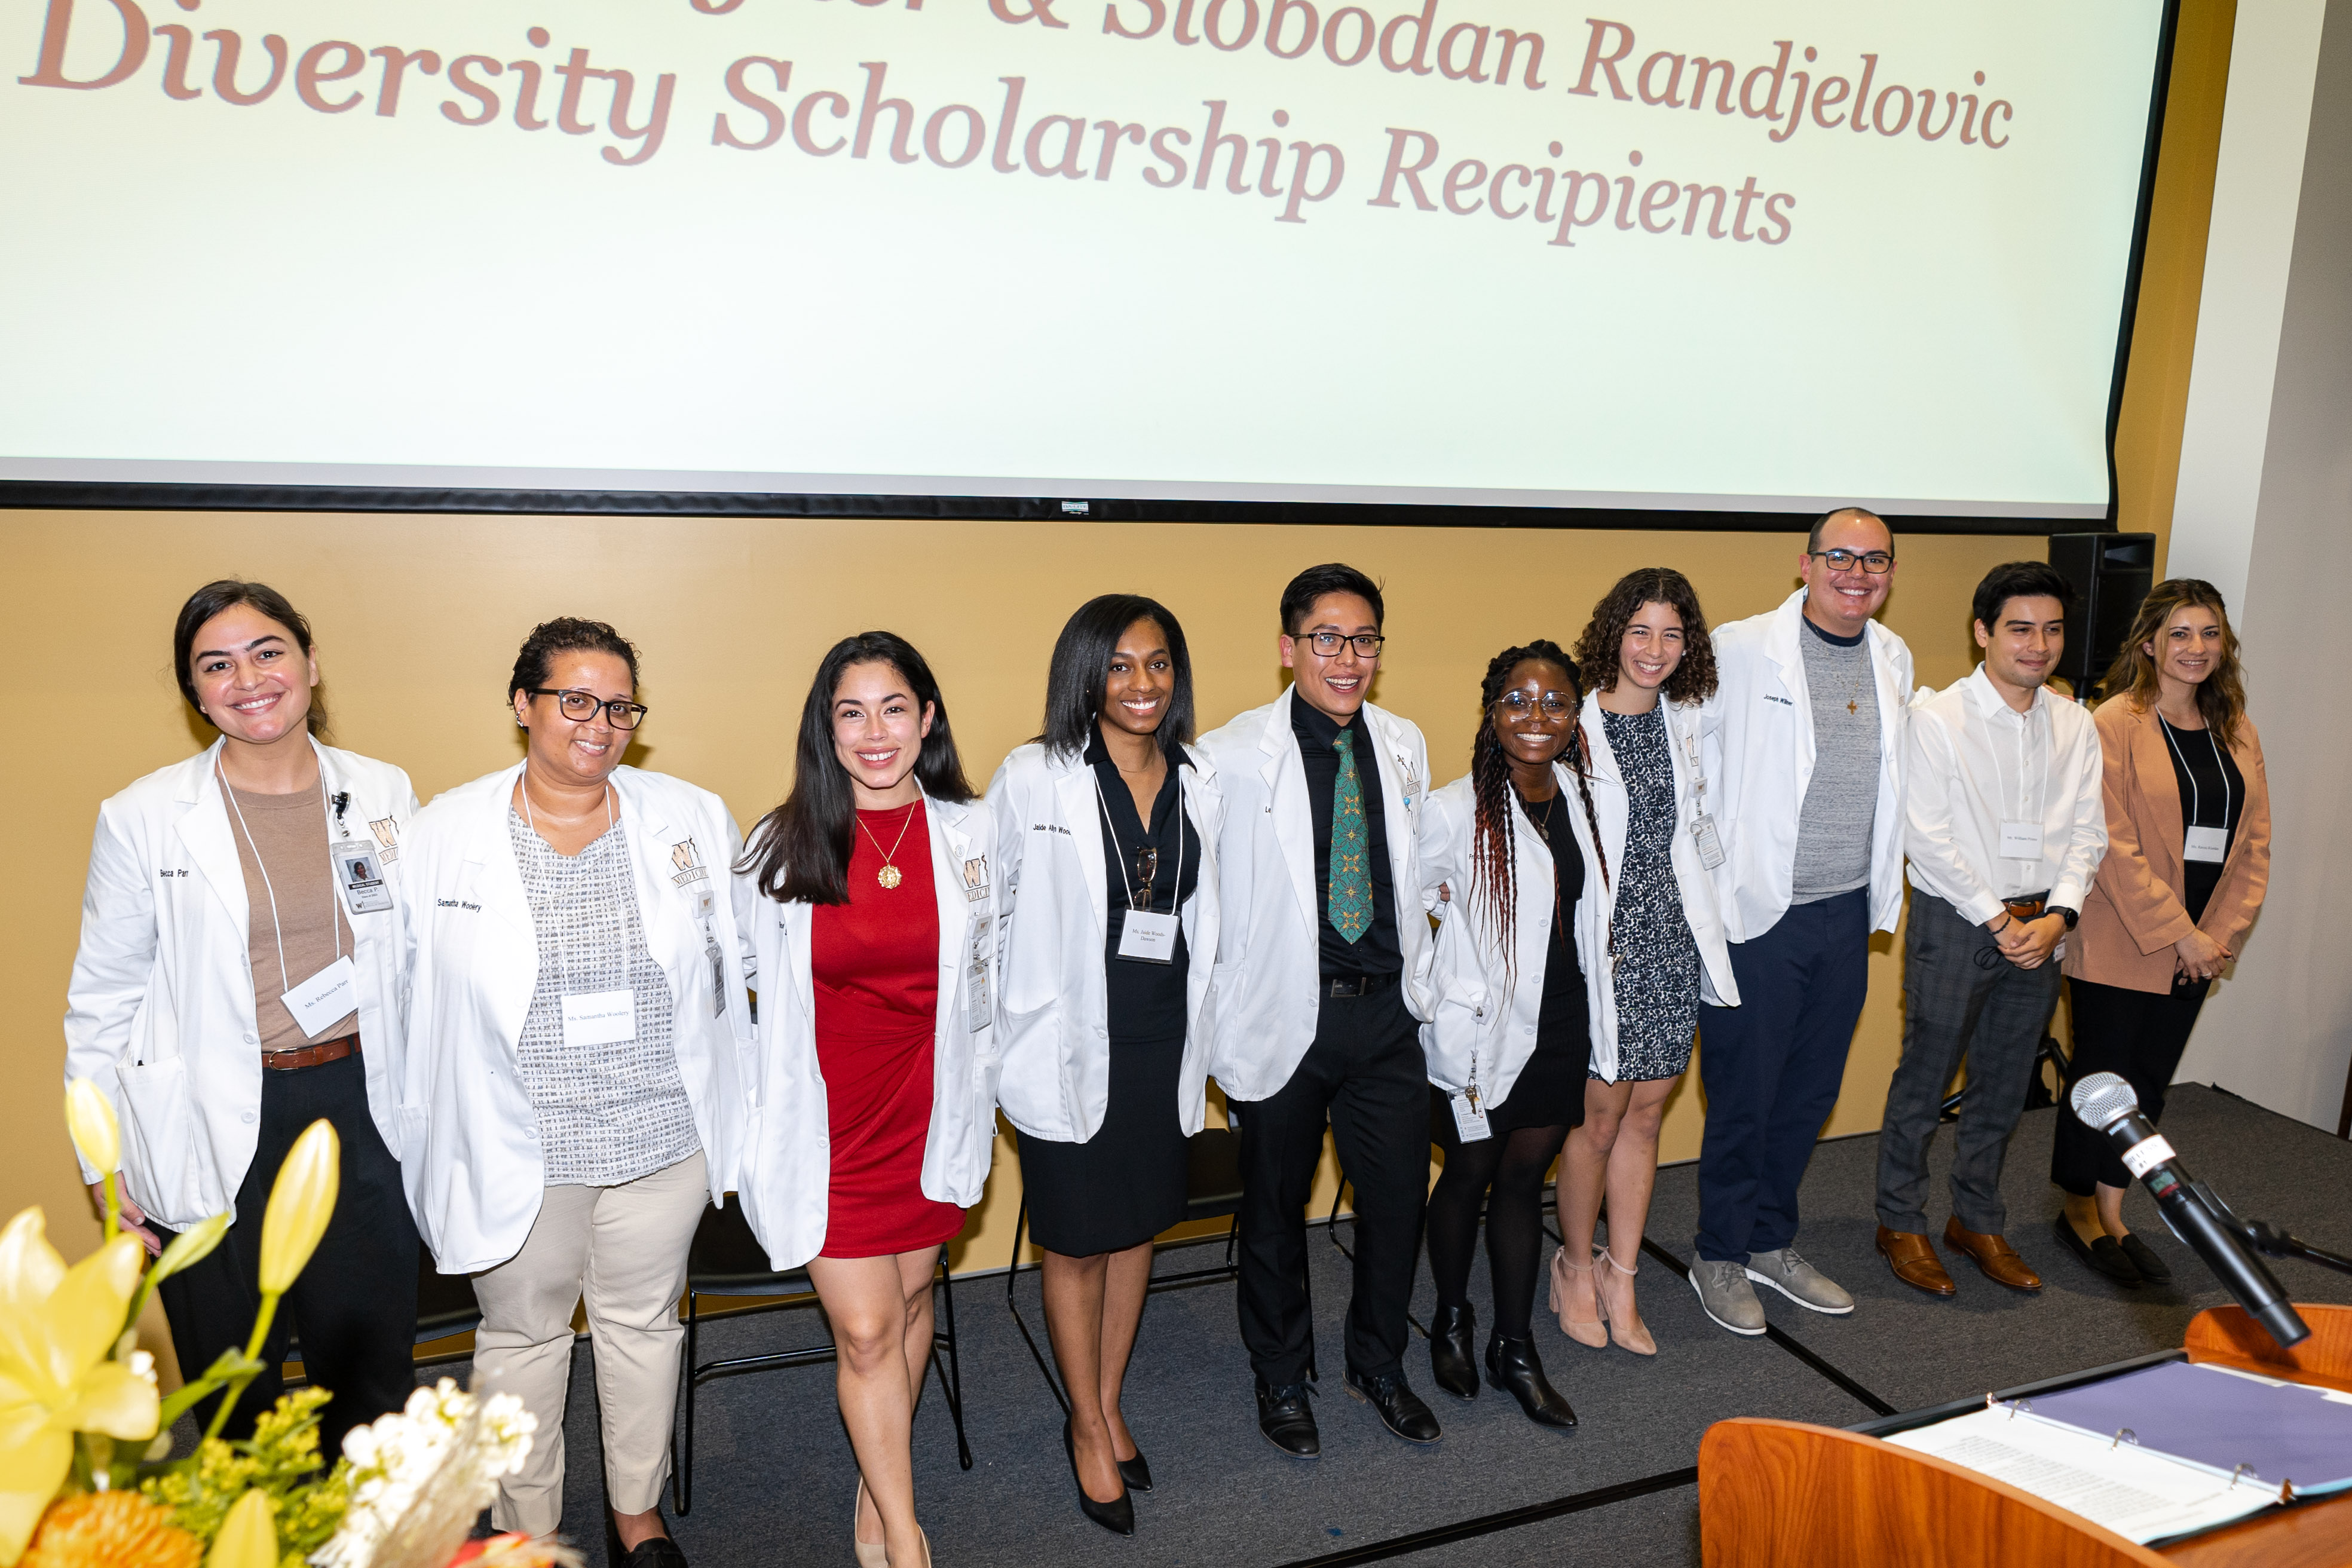 Recipients of a diversity scholarship sponsored by Jon L. Stryker and Slobodon Randjelovic were honored at a donor appreciation luncheon in November at WMed.